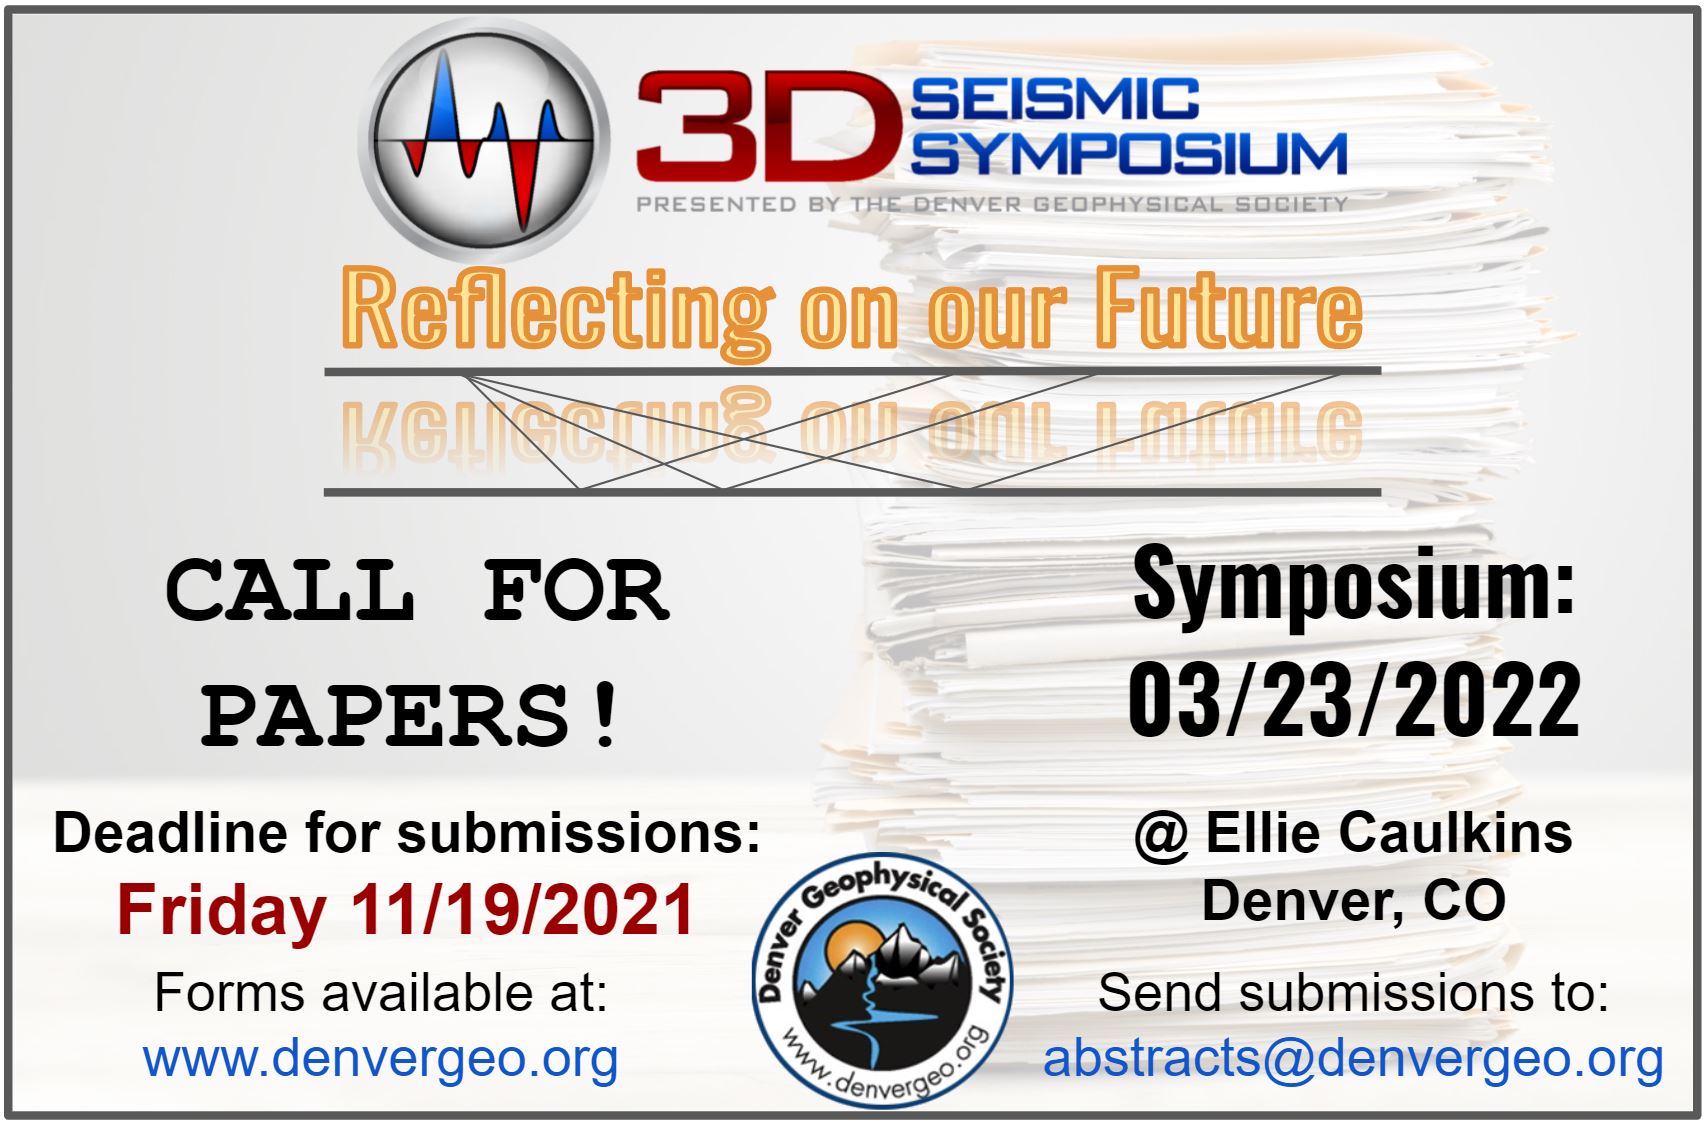 3D Seismic Symposium - Call for Papers. Learn more at www.denvergeo.org